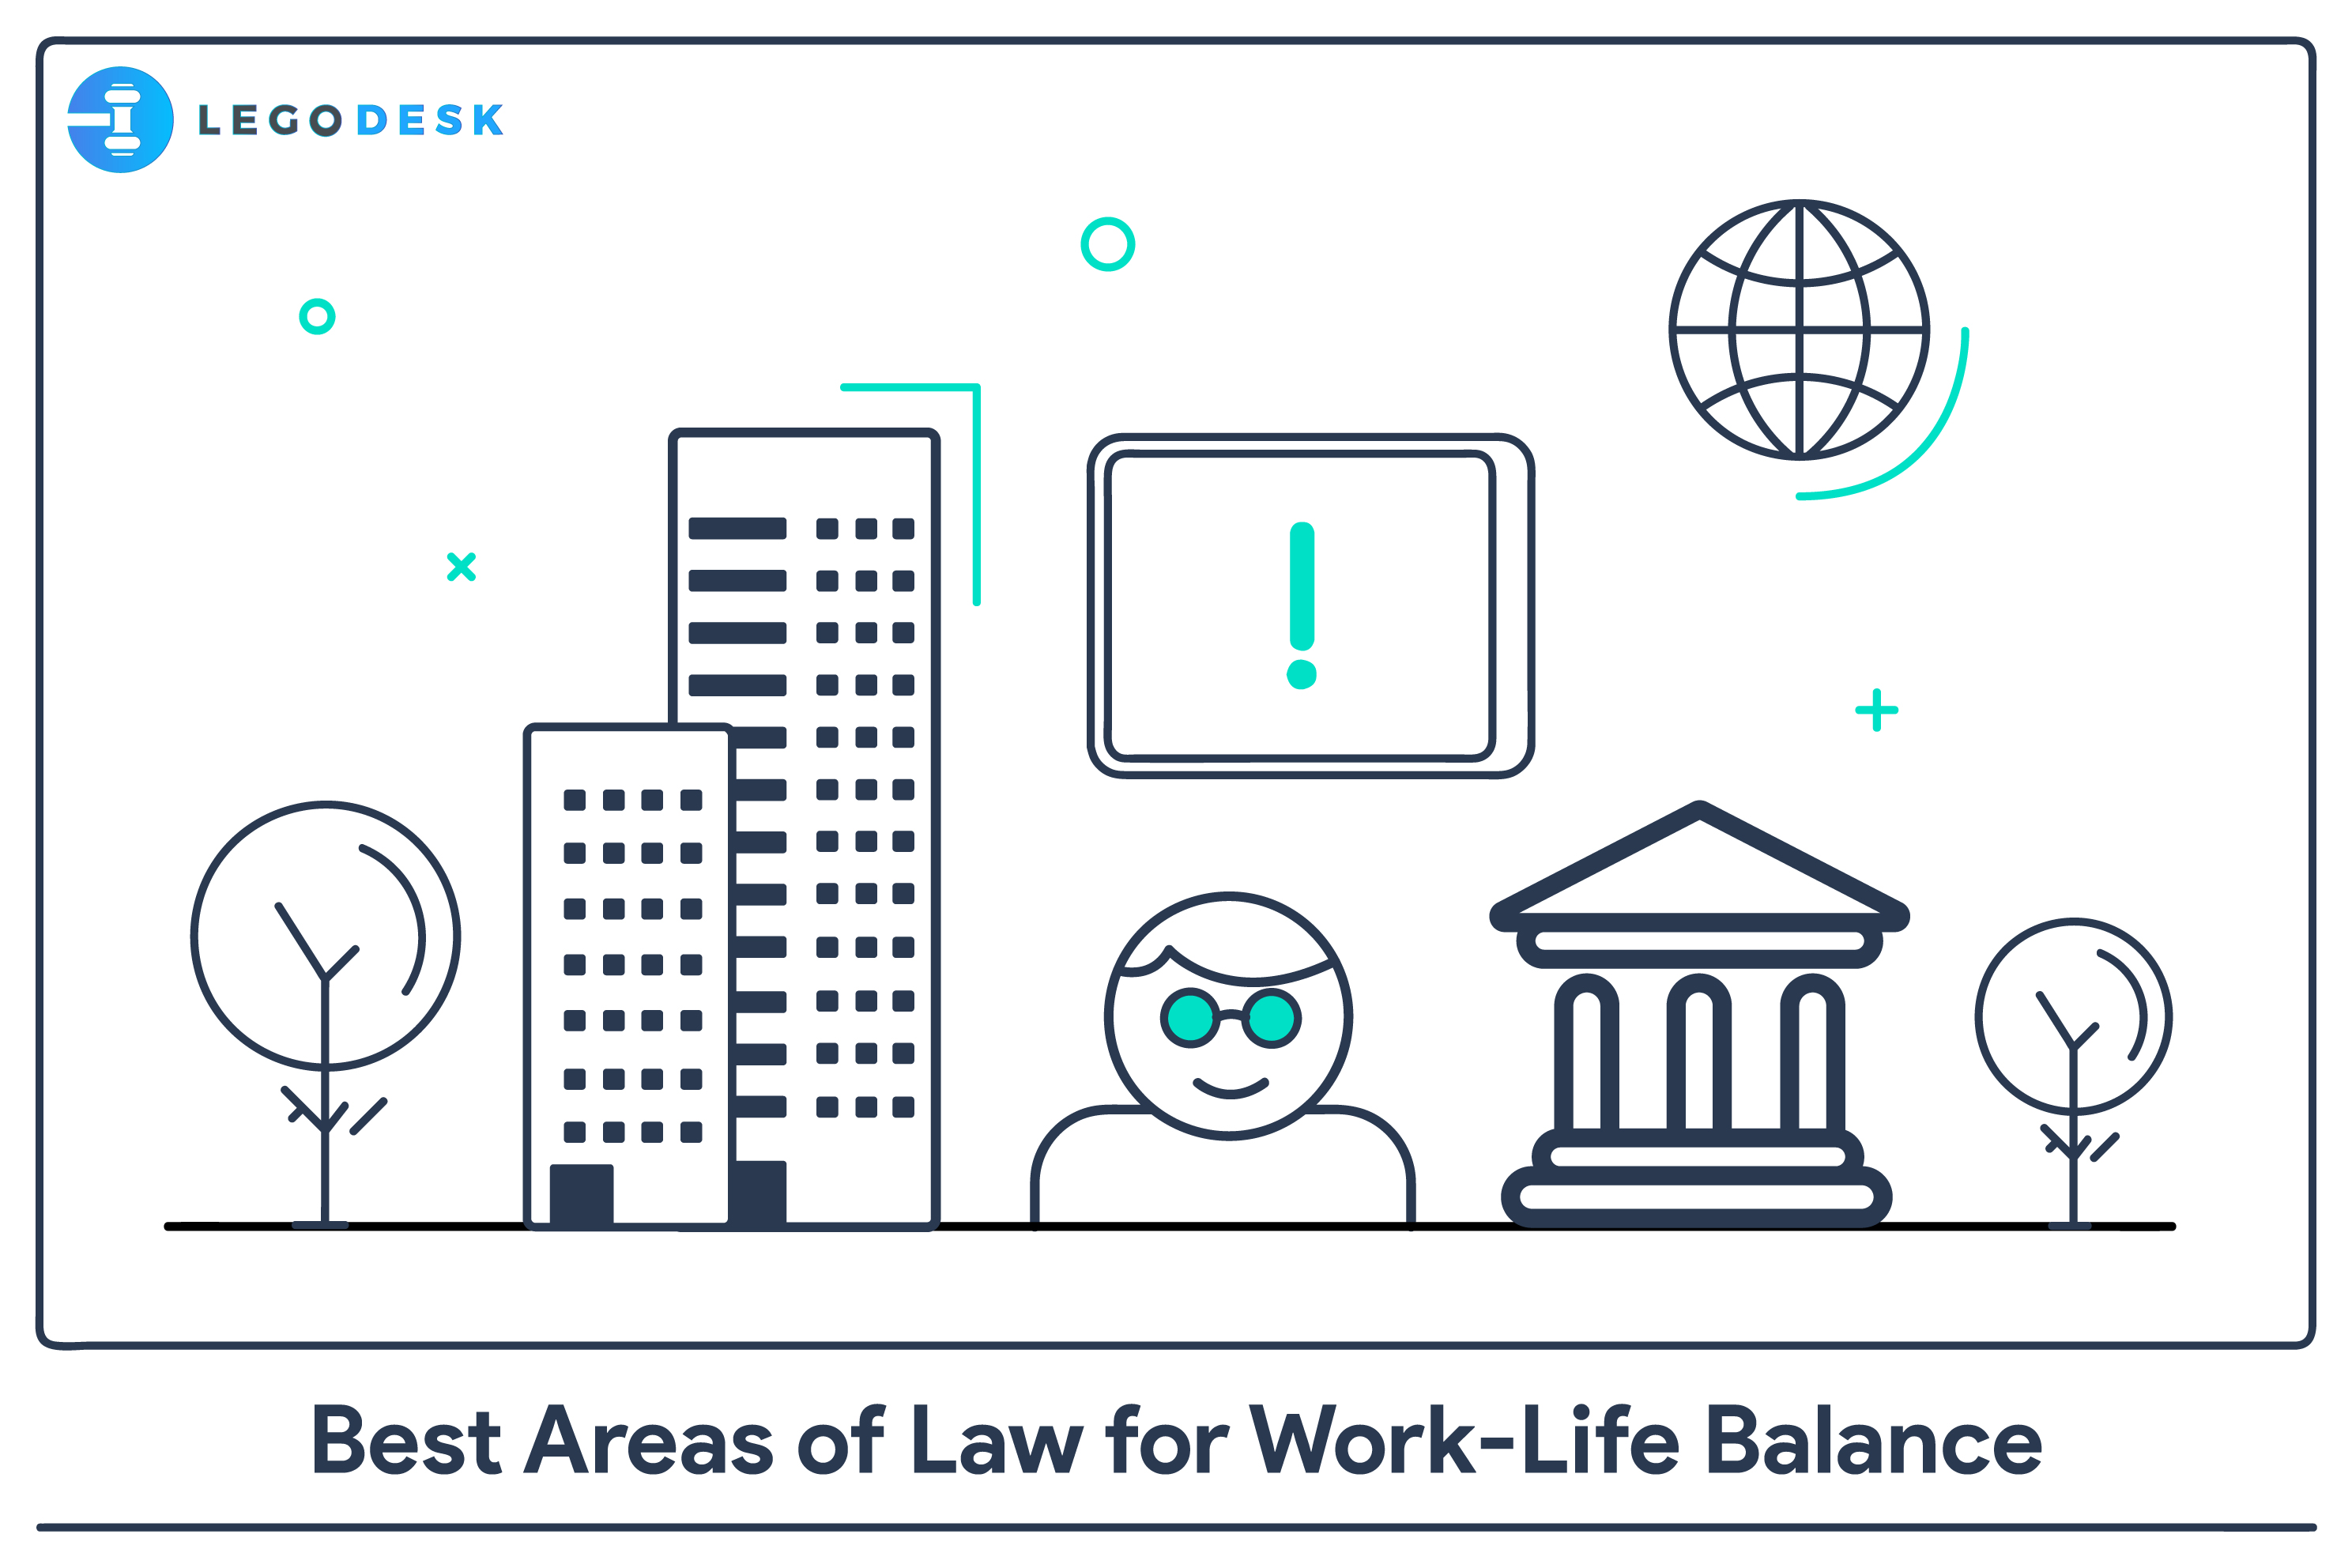 Best Areas of Law for Work-Life Balance